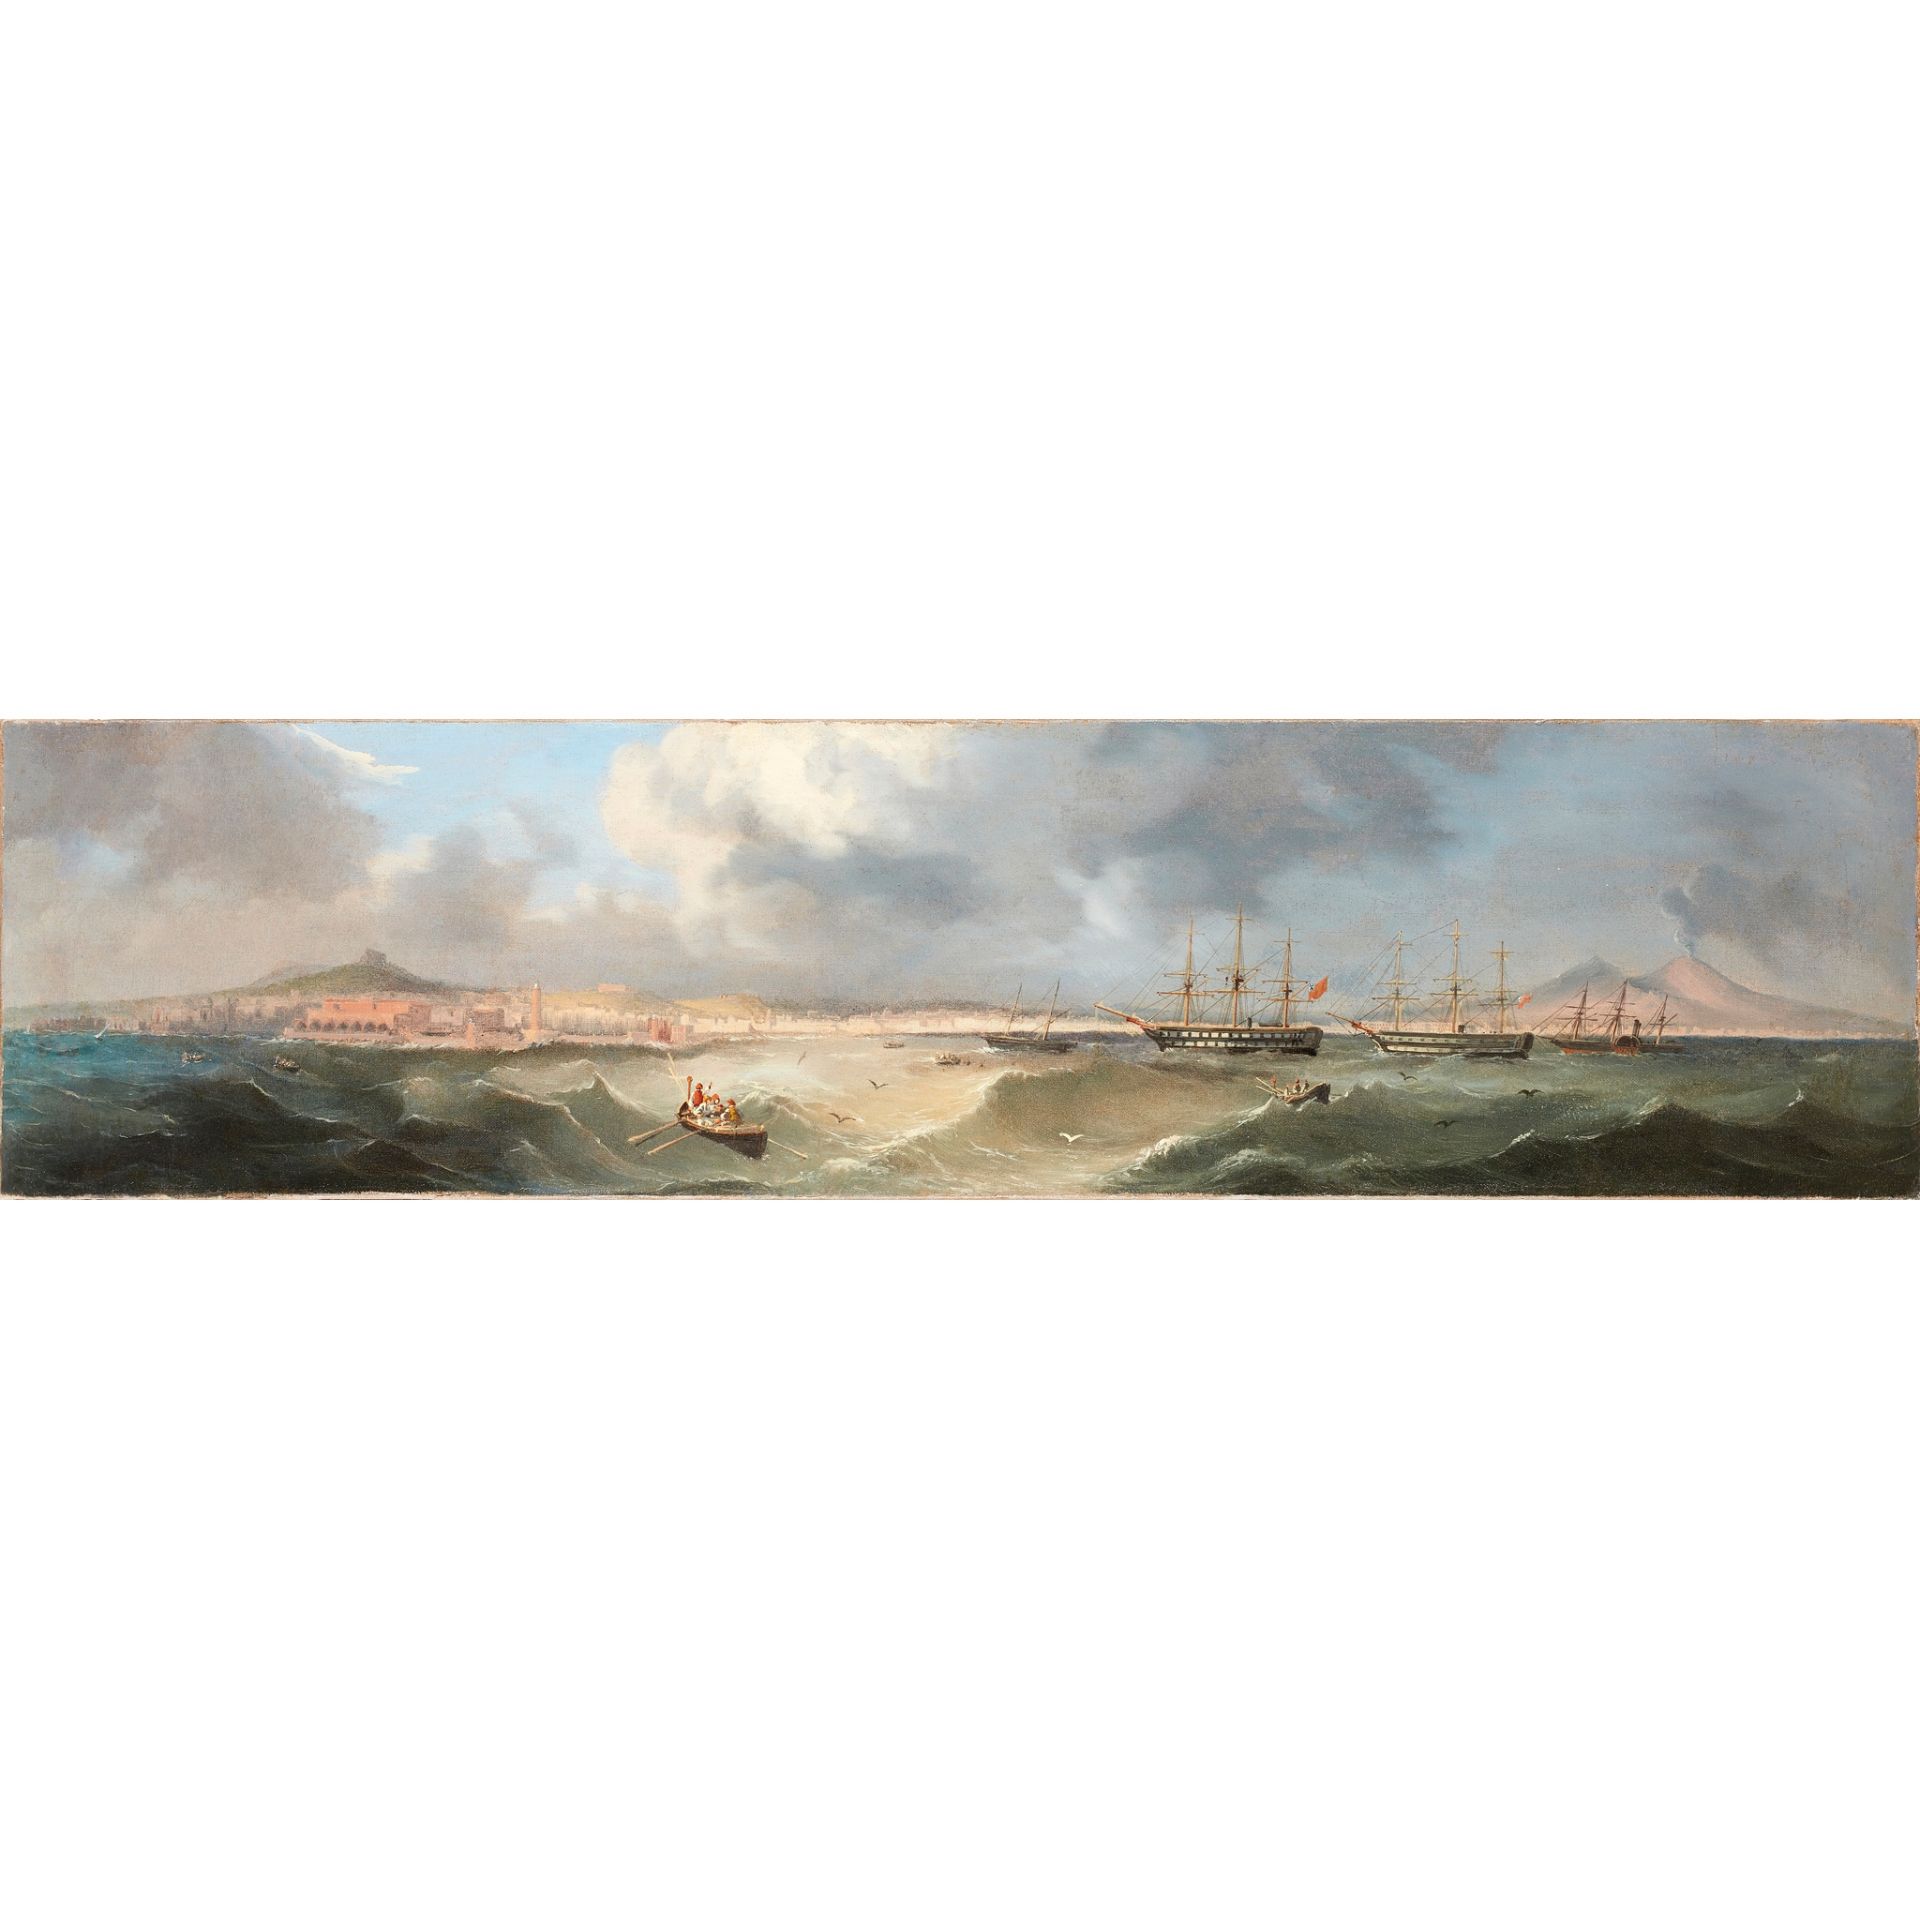 EARLY 19TH CENTURY NEOPOLITAN SCHOOL EXTENSIVE VIEW OF NAPLES AND VERSUVIUS WITH SHIPS AND A